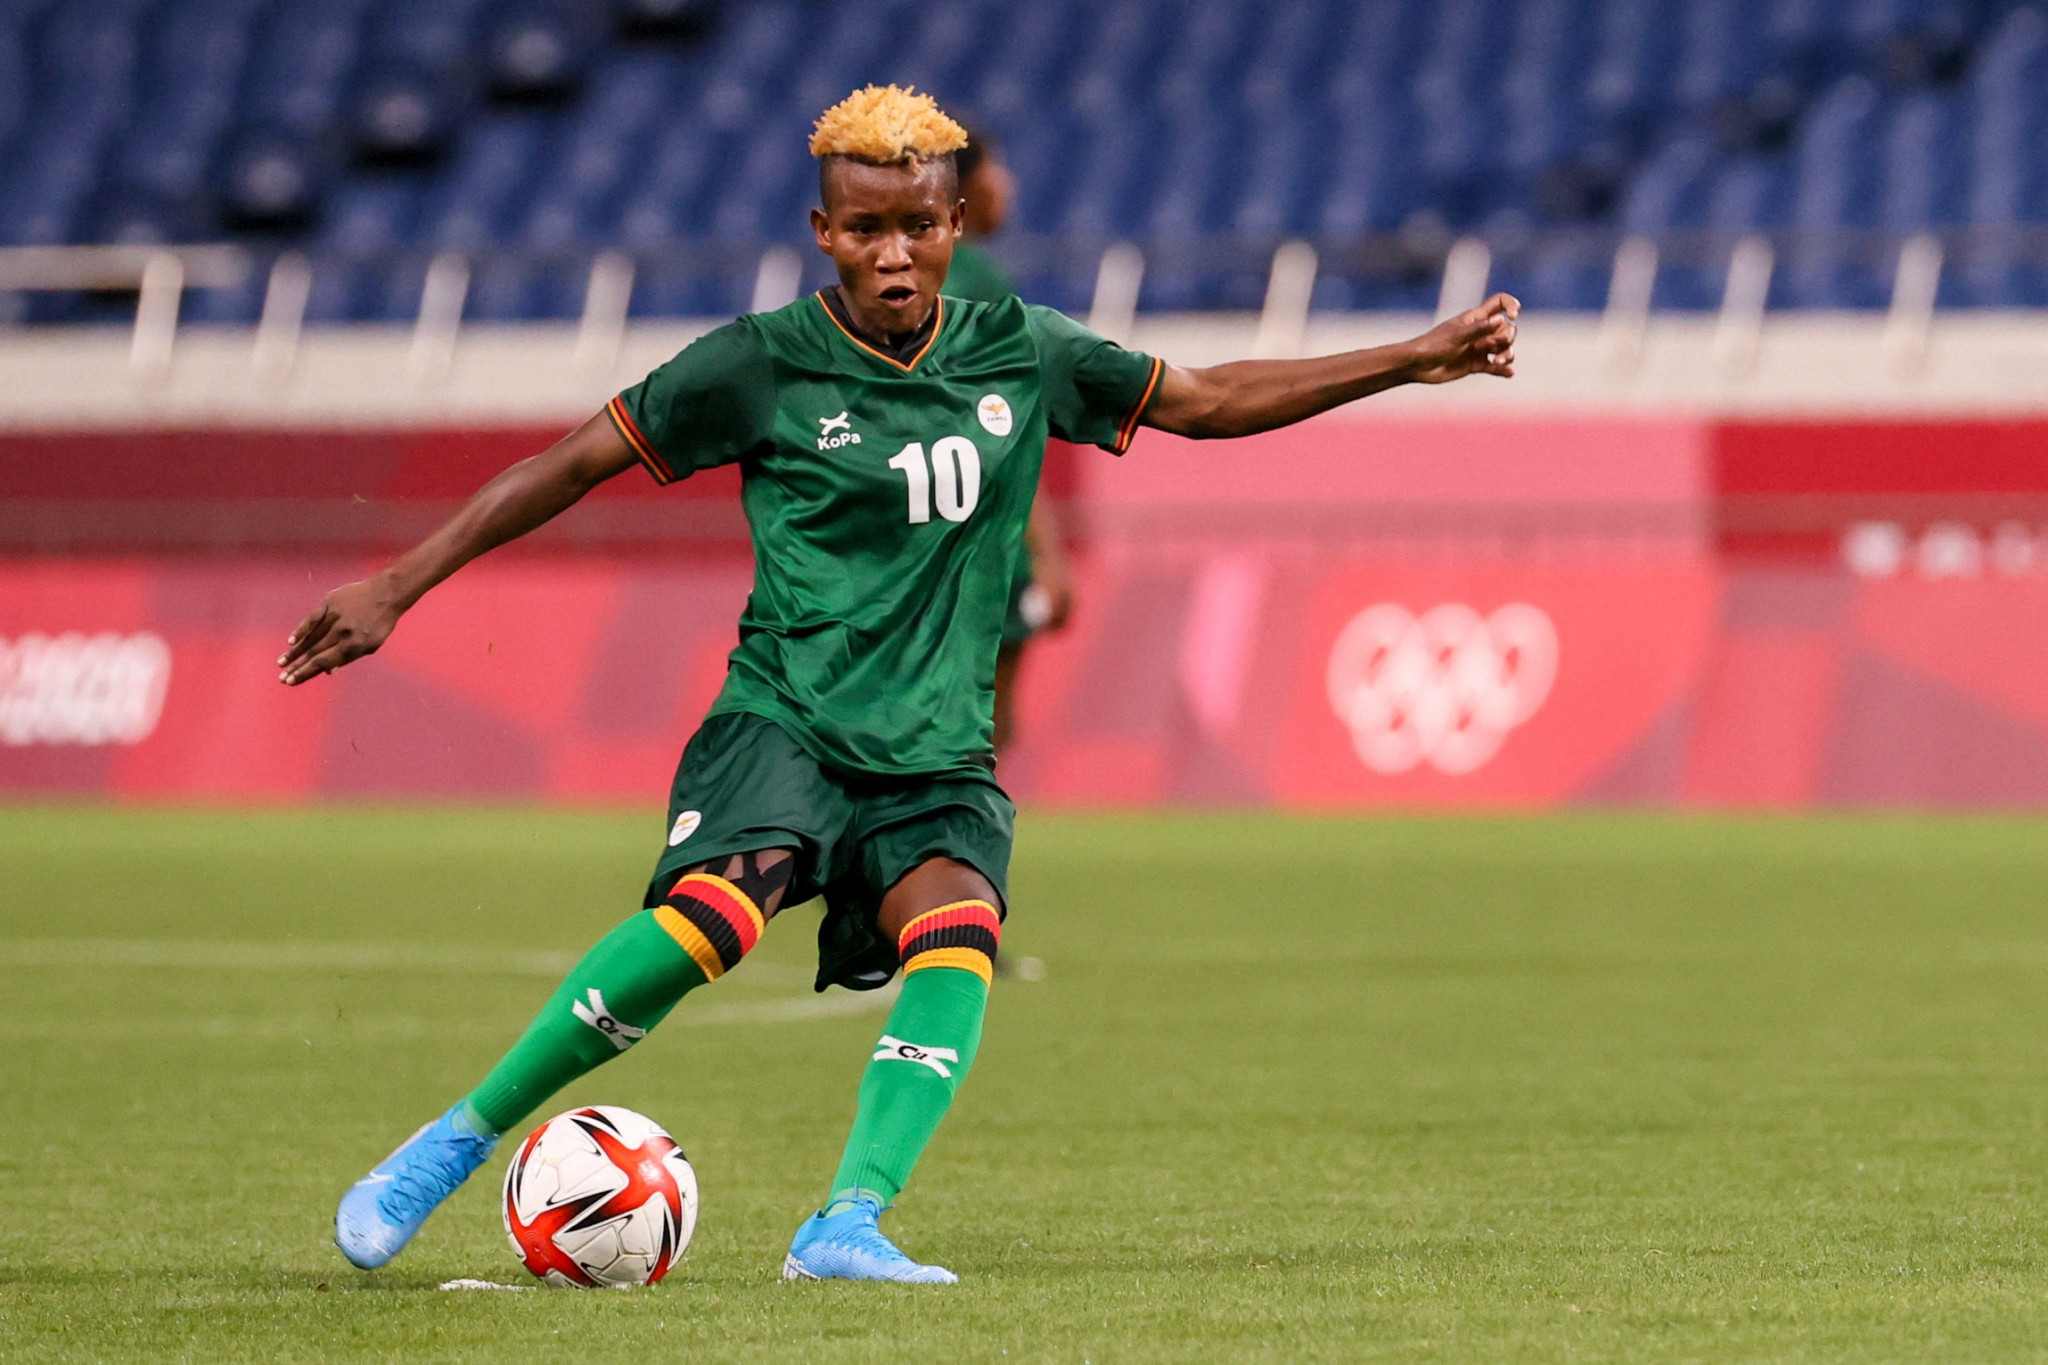 Zambia hammer Togo to progress at Women's Africa Cup of Nations